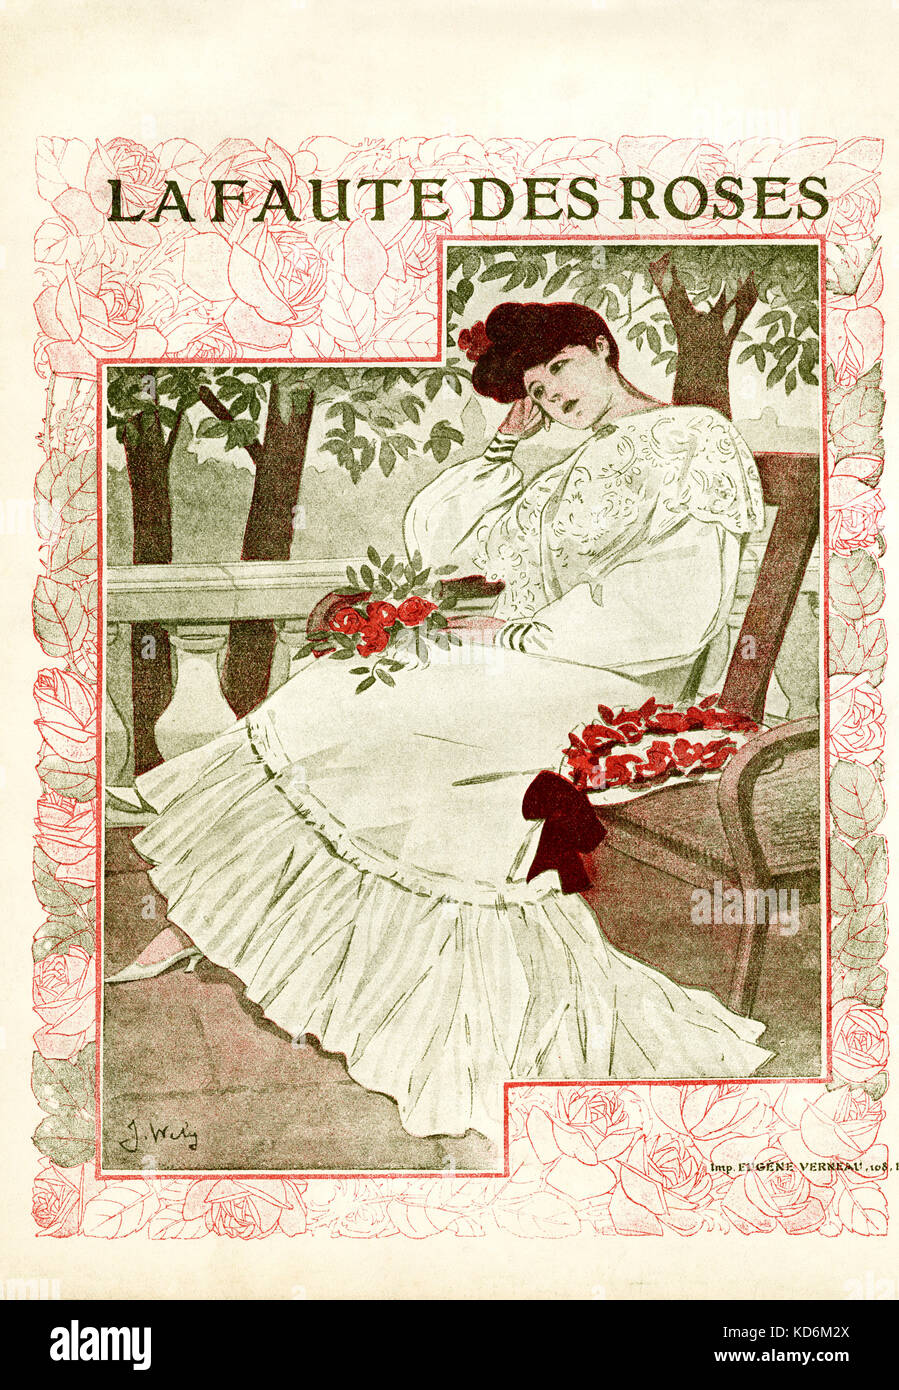 woman in white dress sitting outdoors with bouquet of  roses.  Score cover for slow waltz ' La Faute des Roses '. Stock Photo